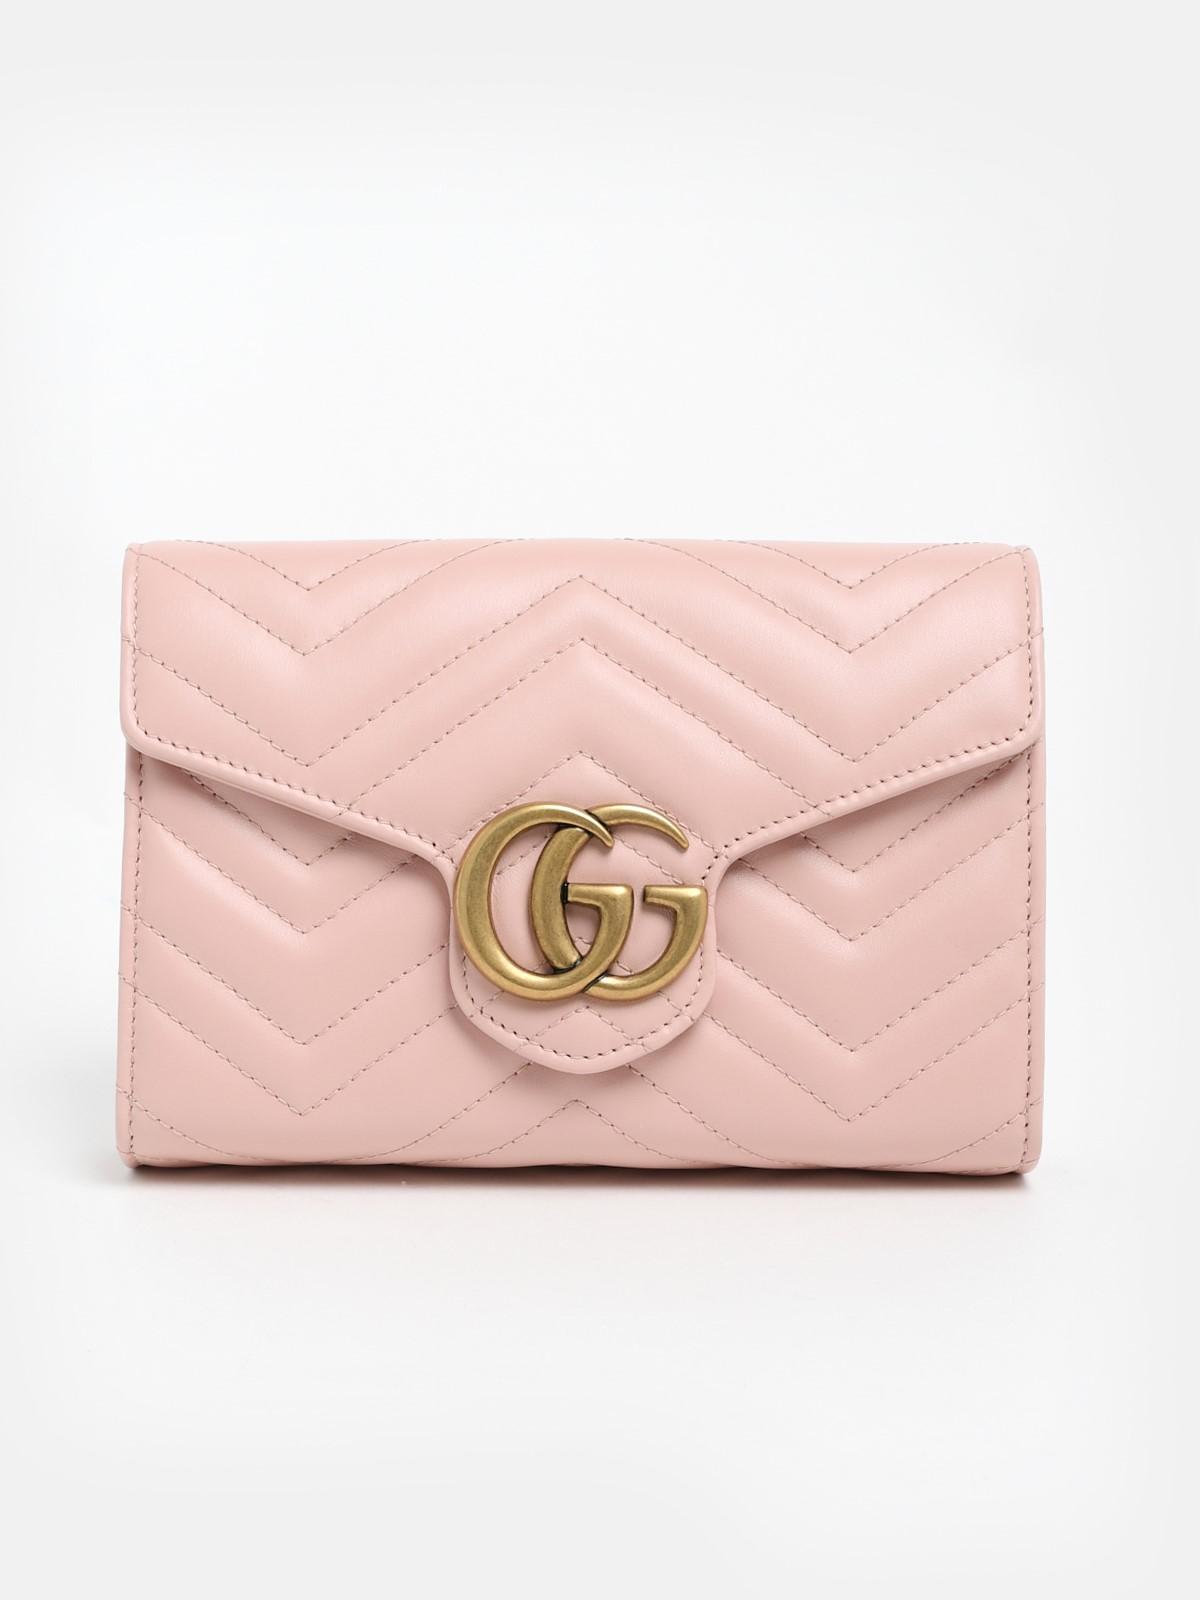 GG Marmont mini bag in light pink leather | GUCCI® US